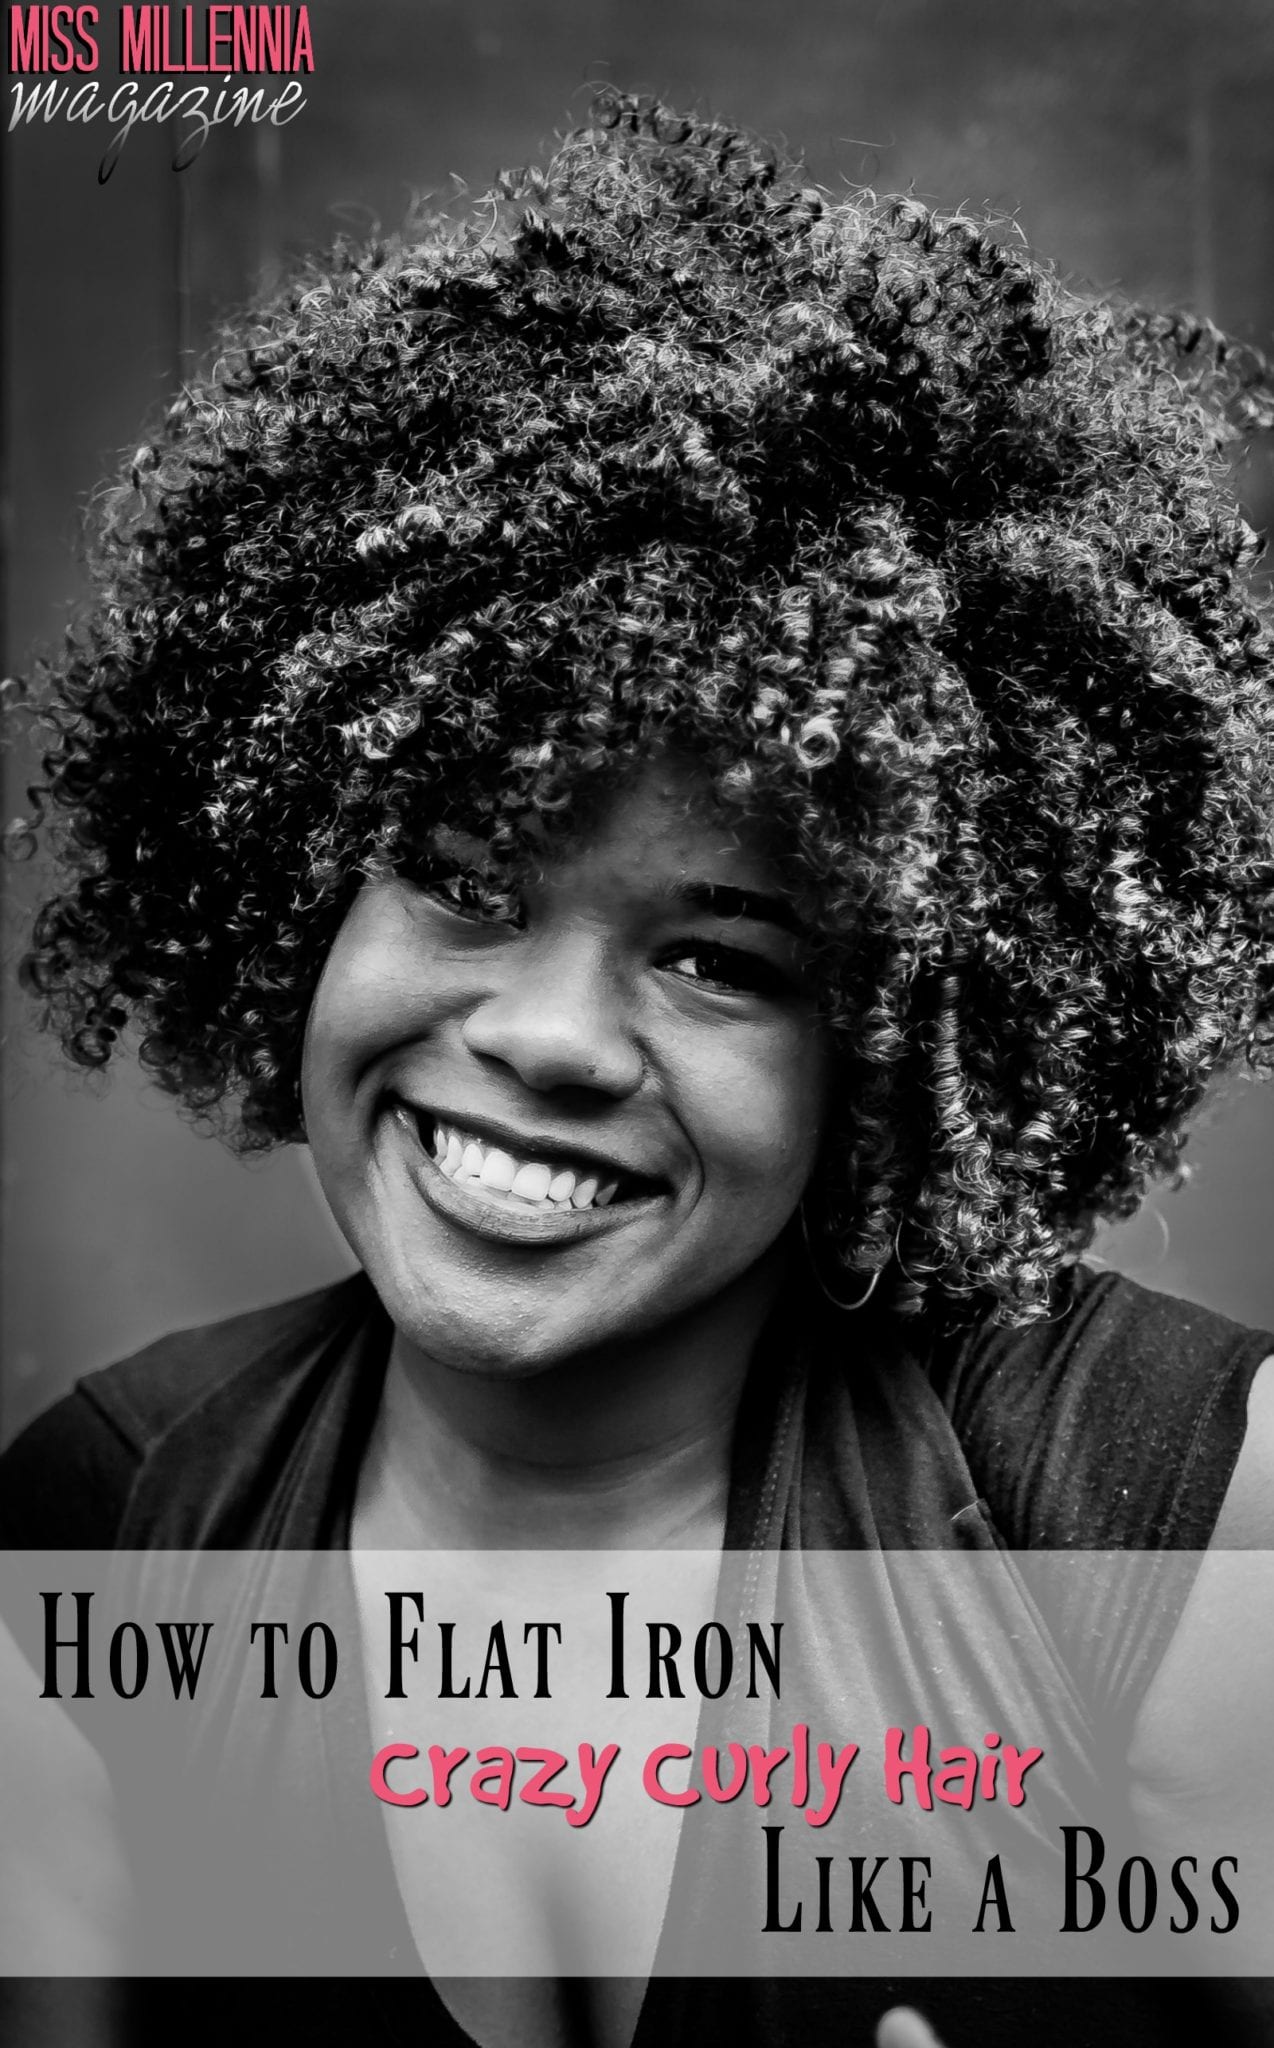 How to Flat Iron Crazy Curly Hair